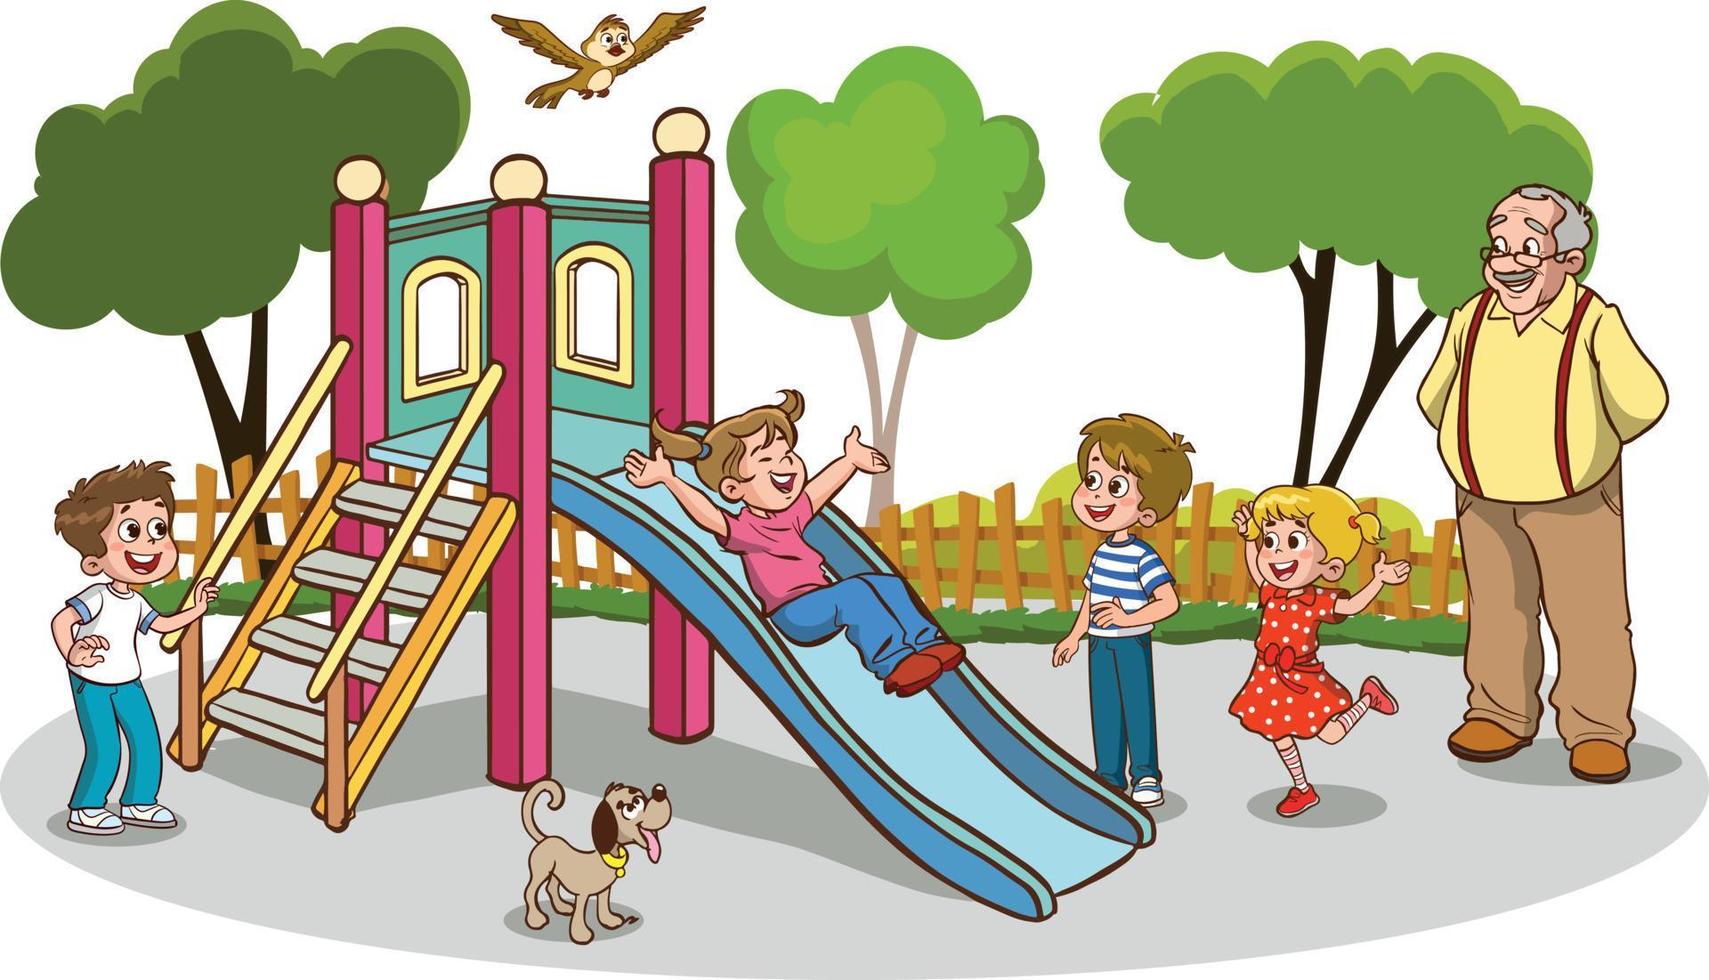 grandfather and kids playing in the playground cartoon vector